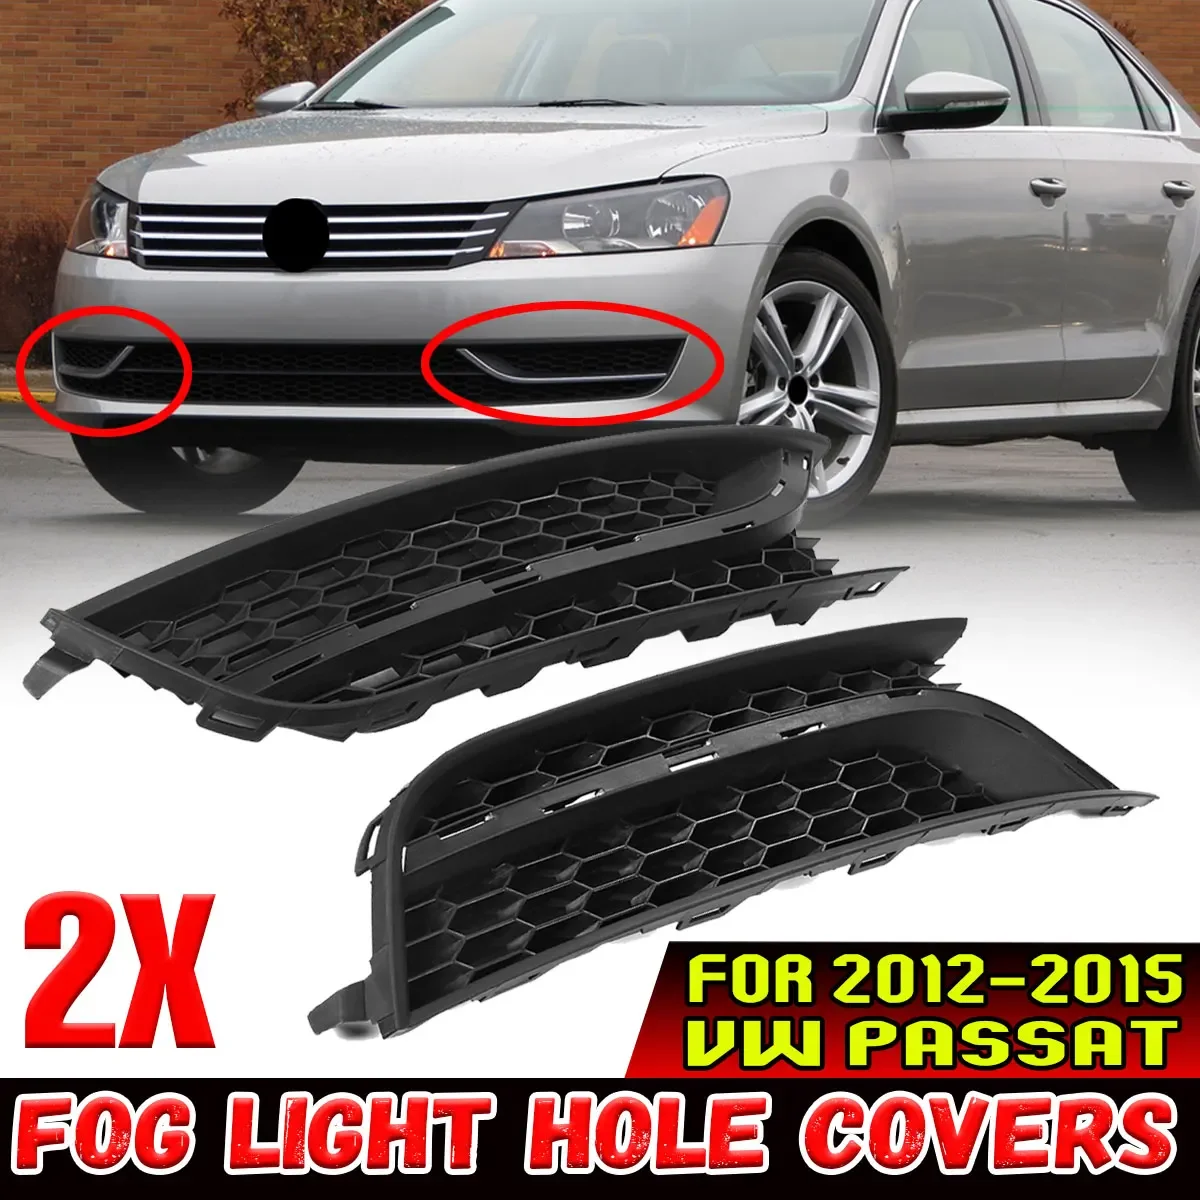 

New 2x Car Front Bumper Fog Lamp Surround Grill Protector For VOLKSWAGEN For VW Passat 2012-2015 Front Fog Light Covers Trim